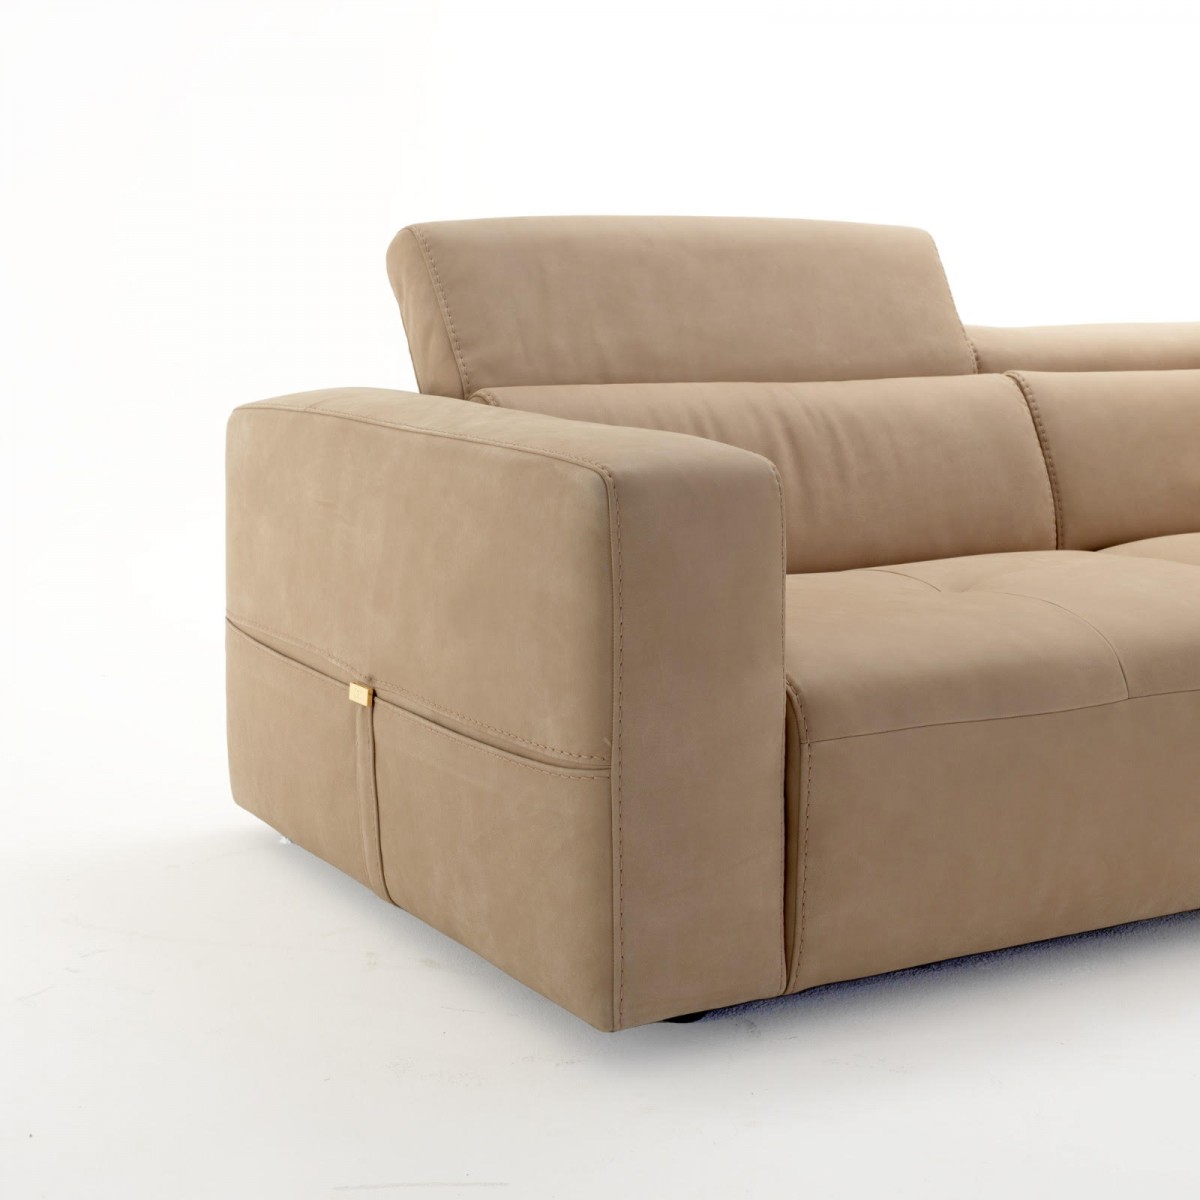 Luxurious Sectional Upholstered in Real Leather with Pillows